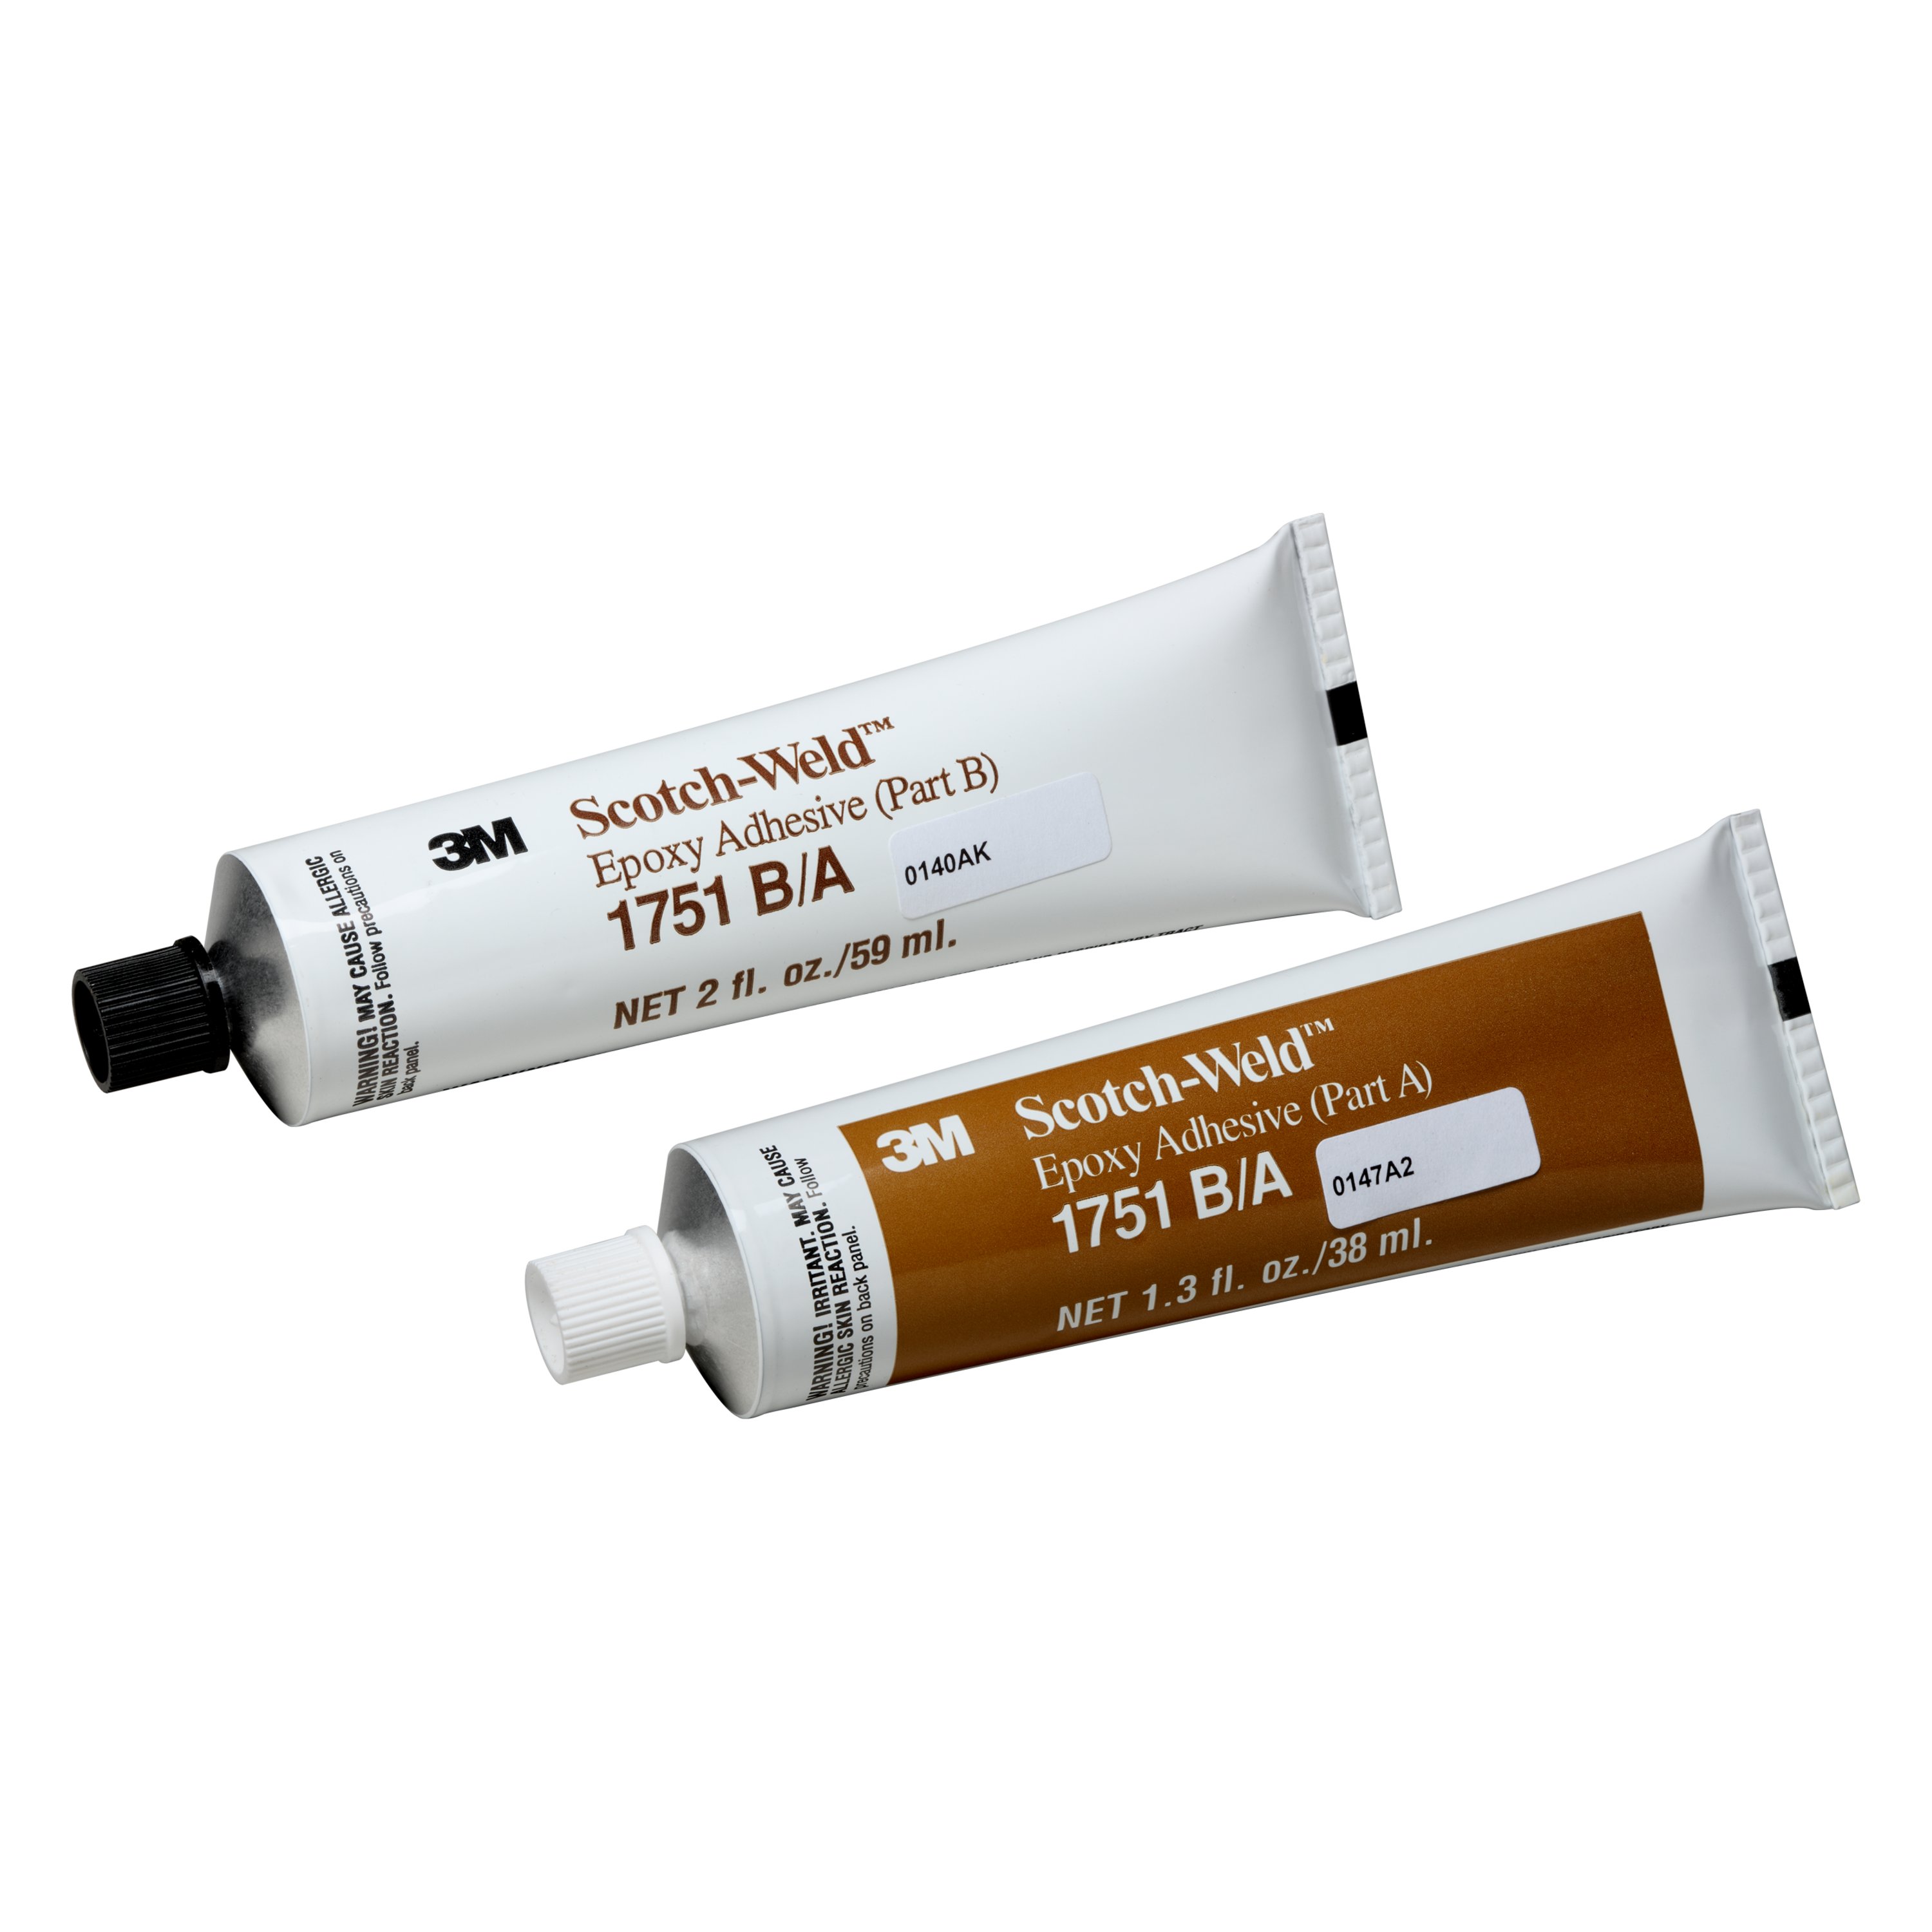 3M formulated 3M™ Scotch-Weld™ Epoxy Adhesive 1751 to provide rigid, high strength bonds for metal, wood, masonary and some plastics and composites.